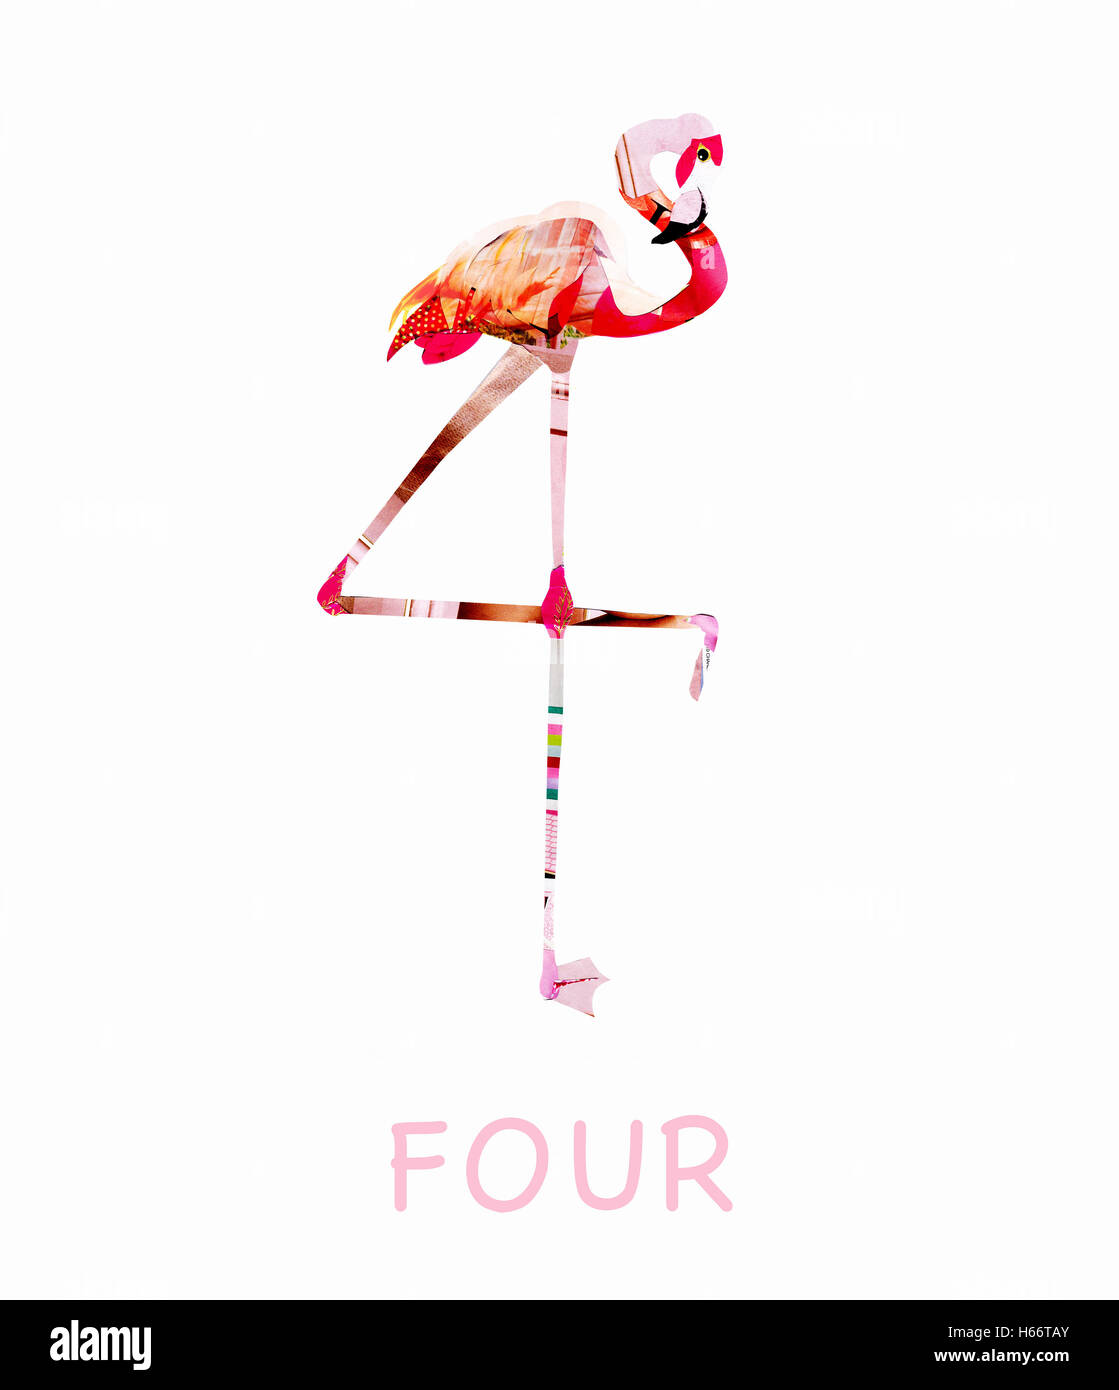 Pink flamingo standing against white background Stock Photo